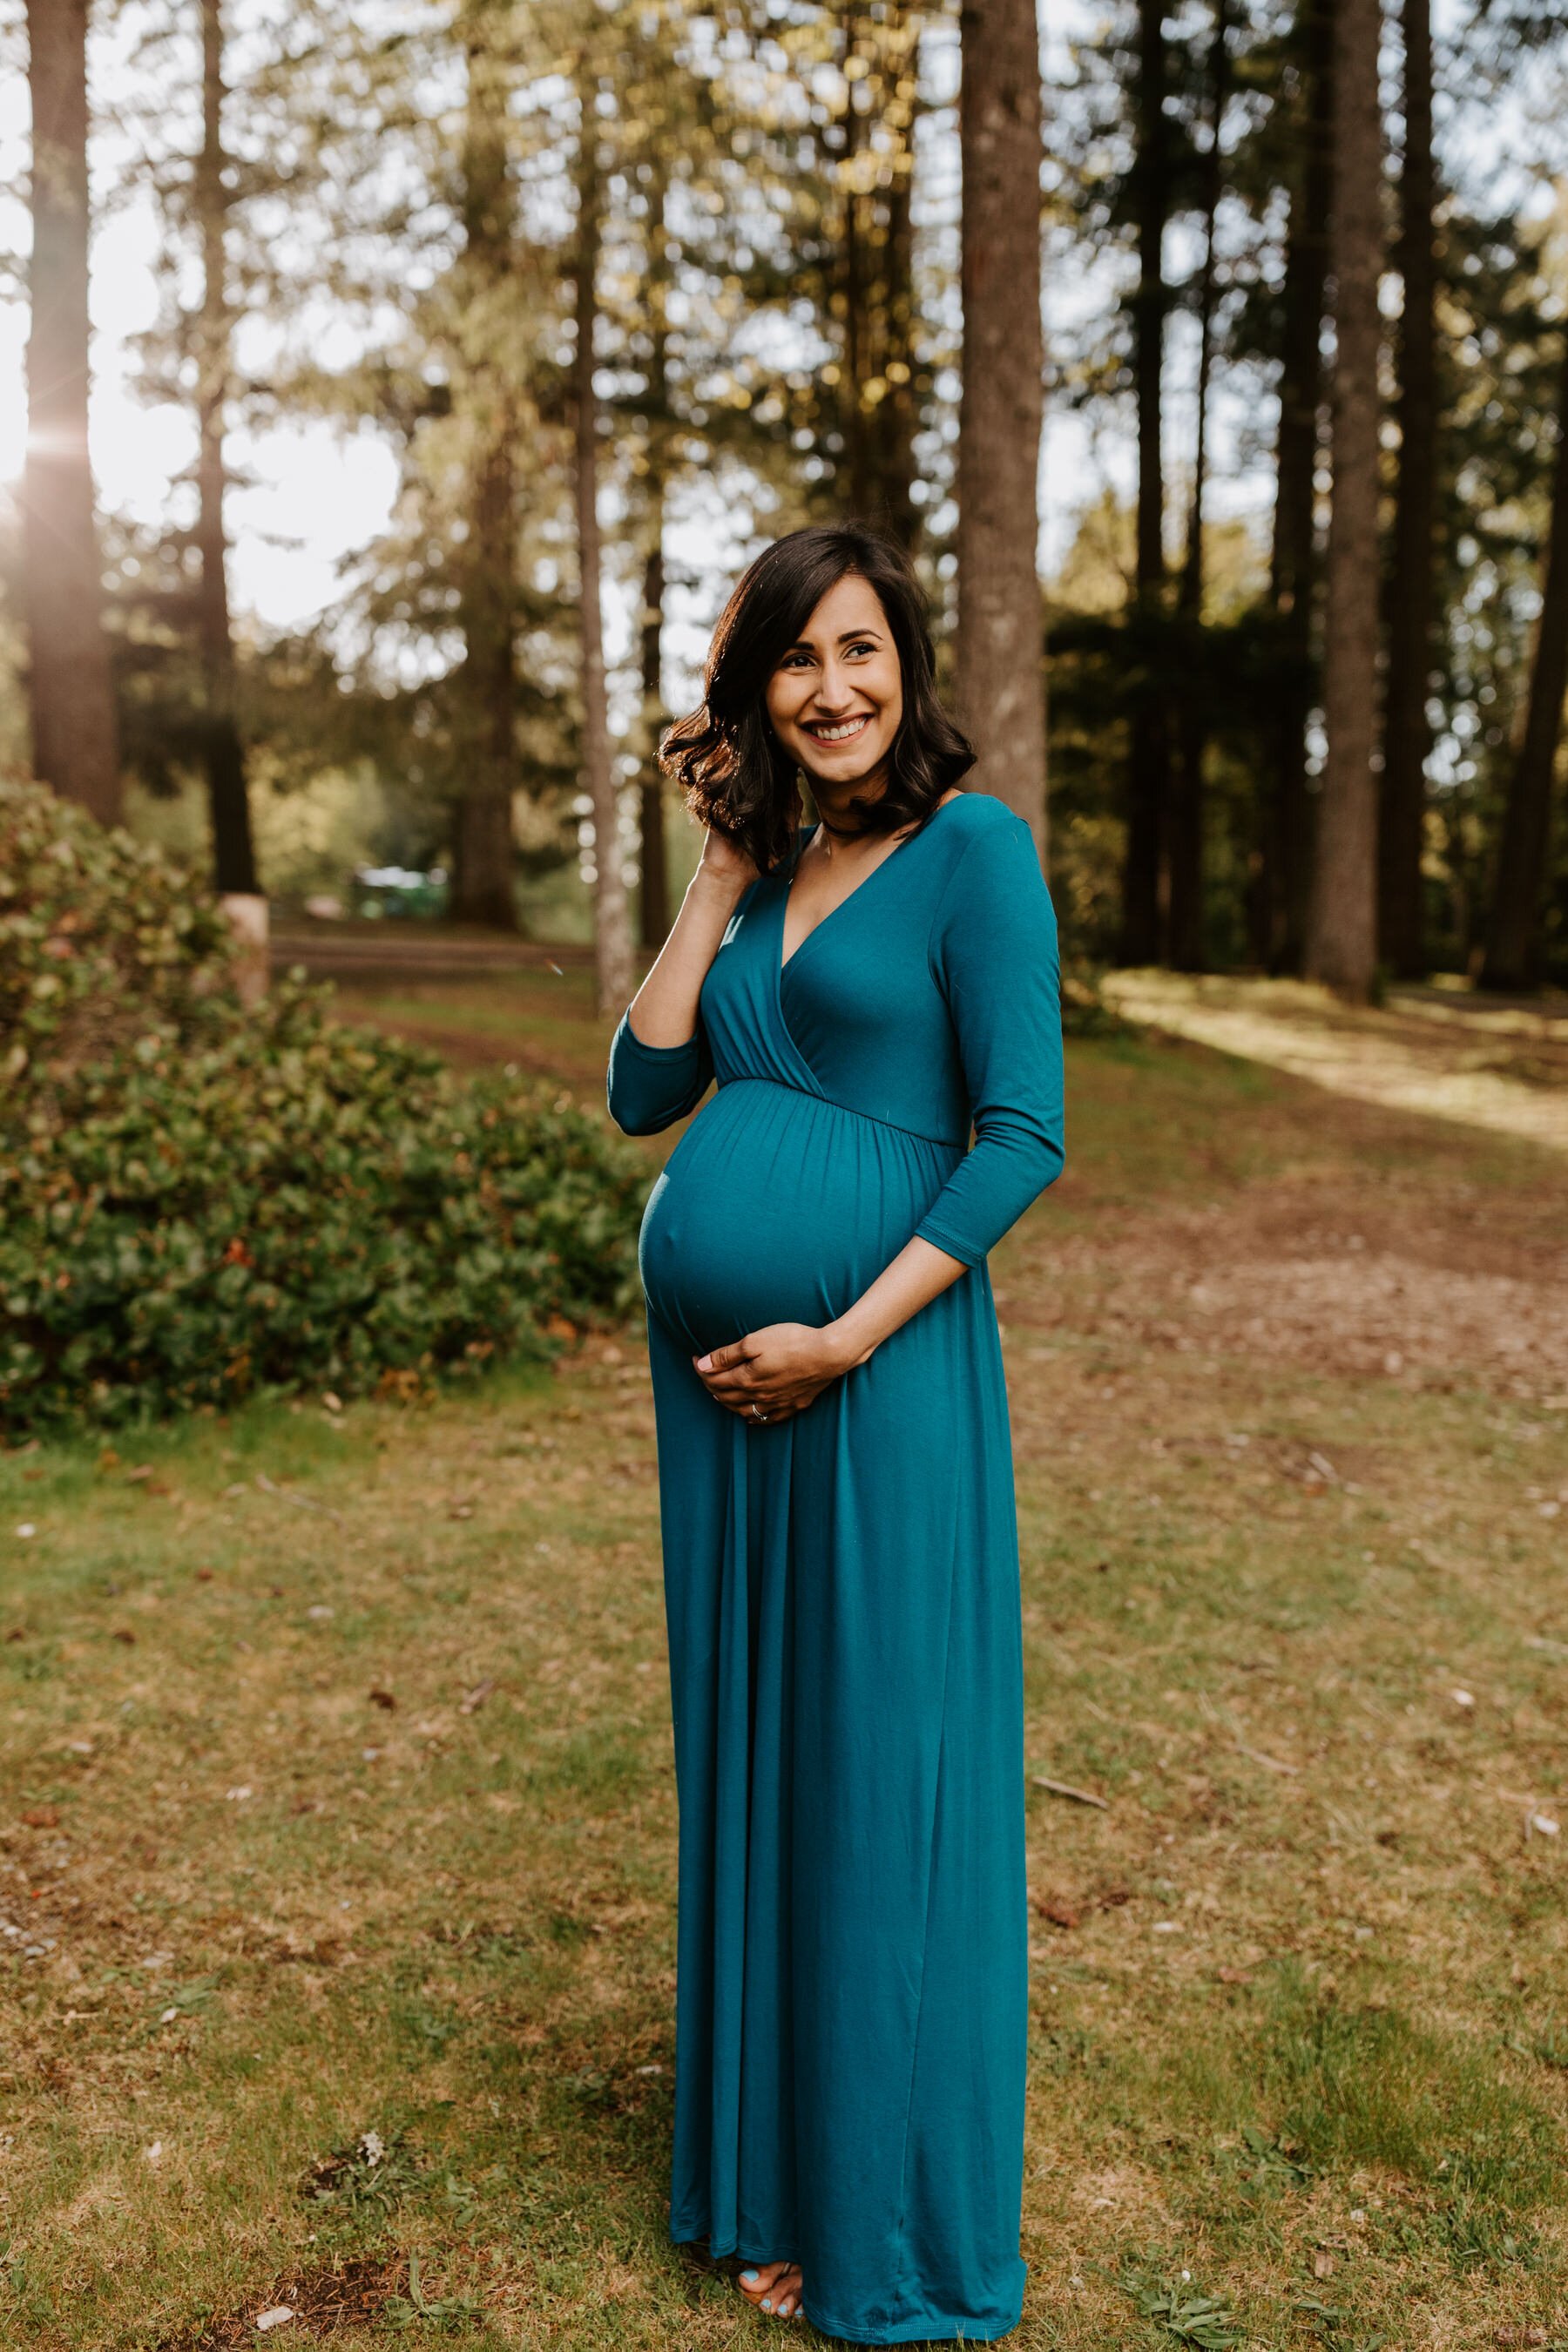 Pregnant maternity photo blue teal dress | Seattle Maternity Photos | Outdoor forest golden hour maternity session at Lake Wilderness Park in Maple Valley, WA | Tida Svy | www.tidasvy.com